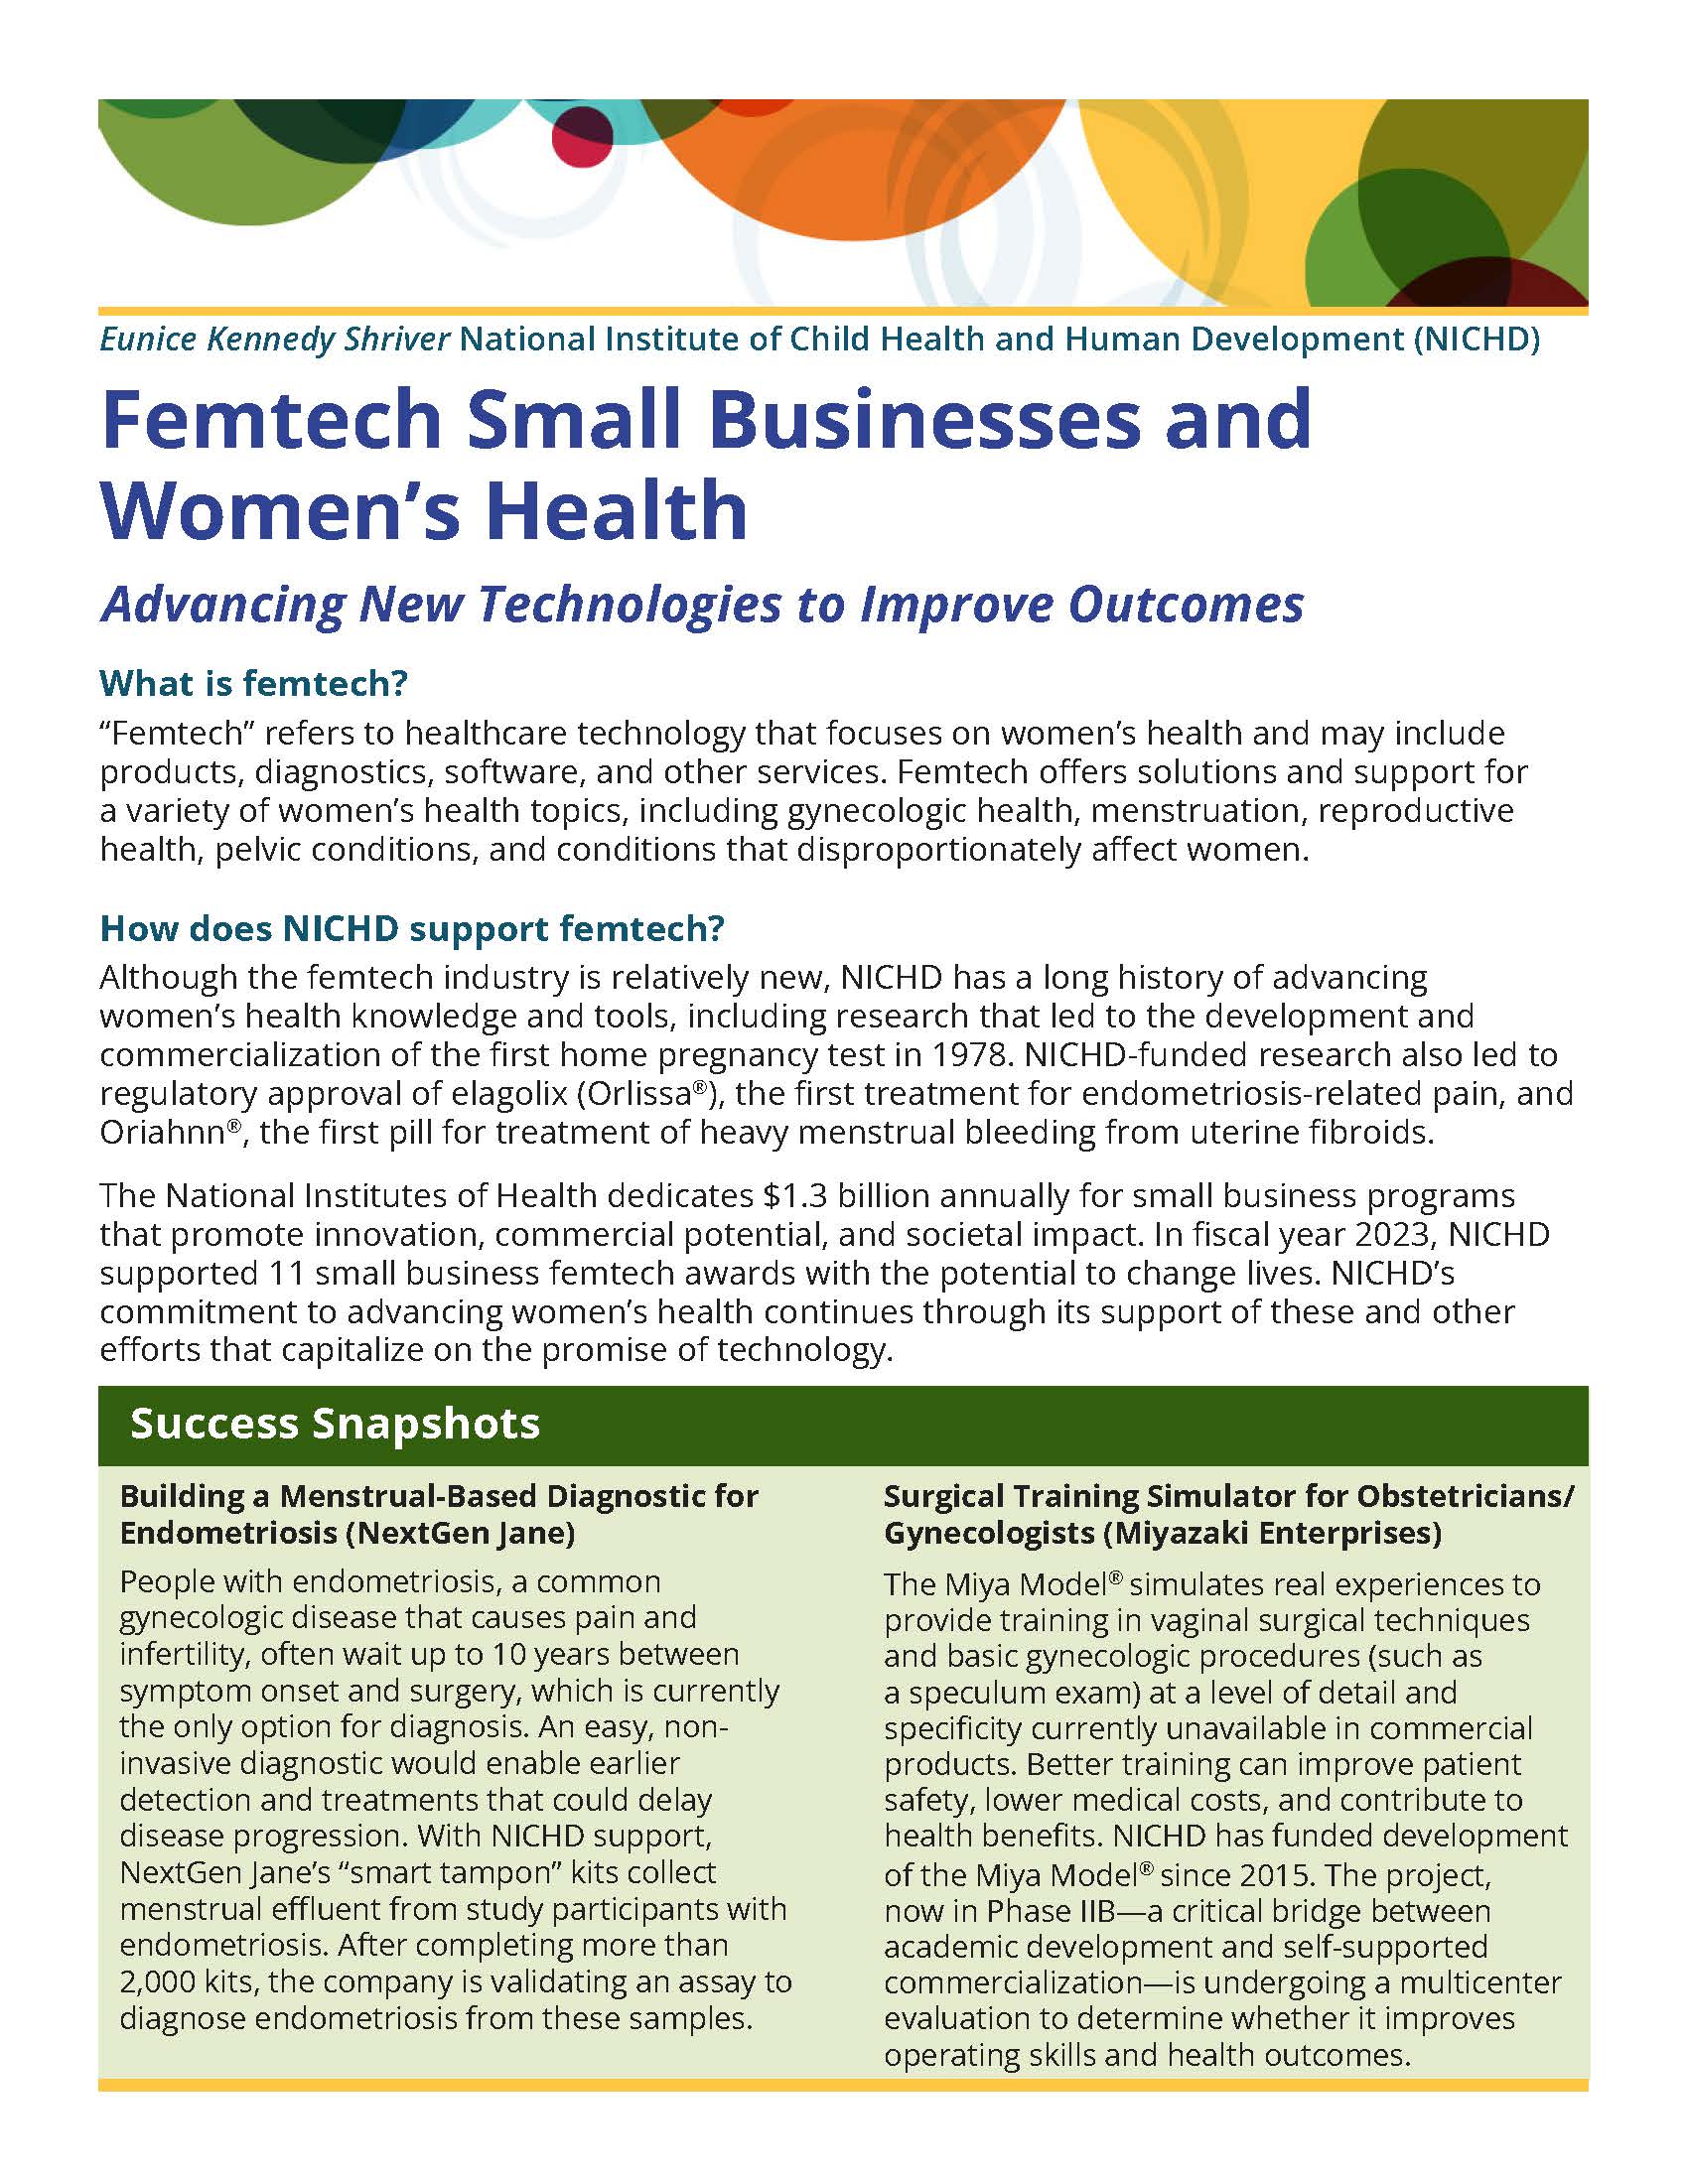 Front of the NICHD "Femtech Small Businesses and Women's Health" Fact Sheet